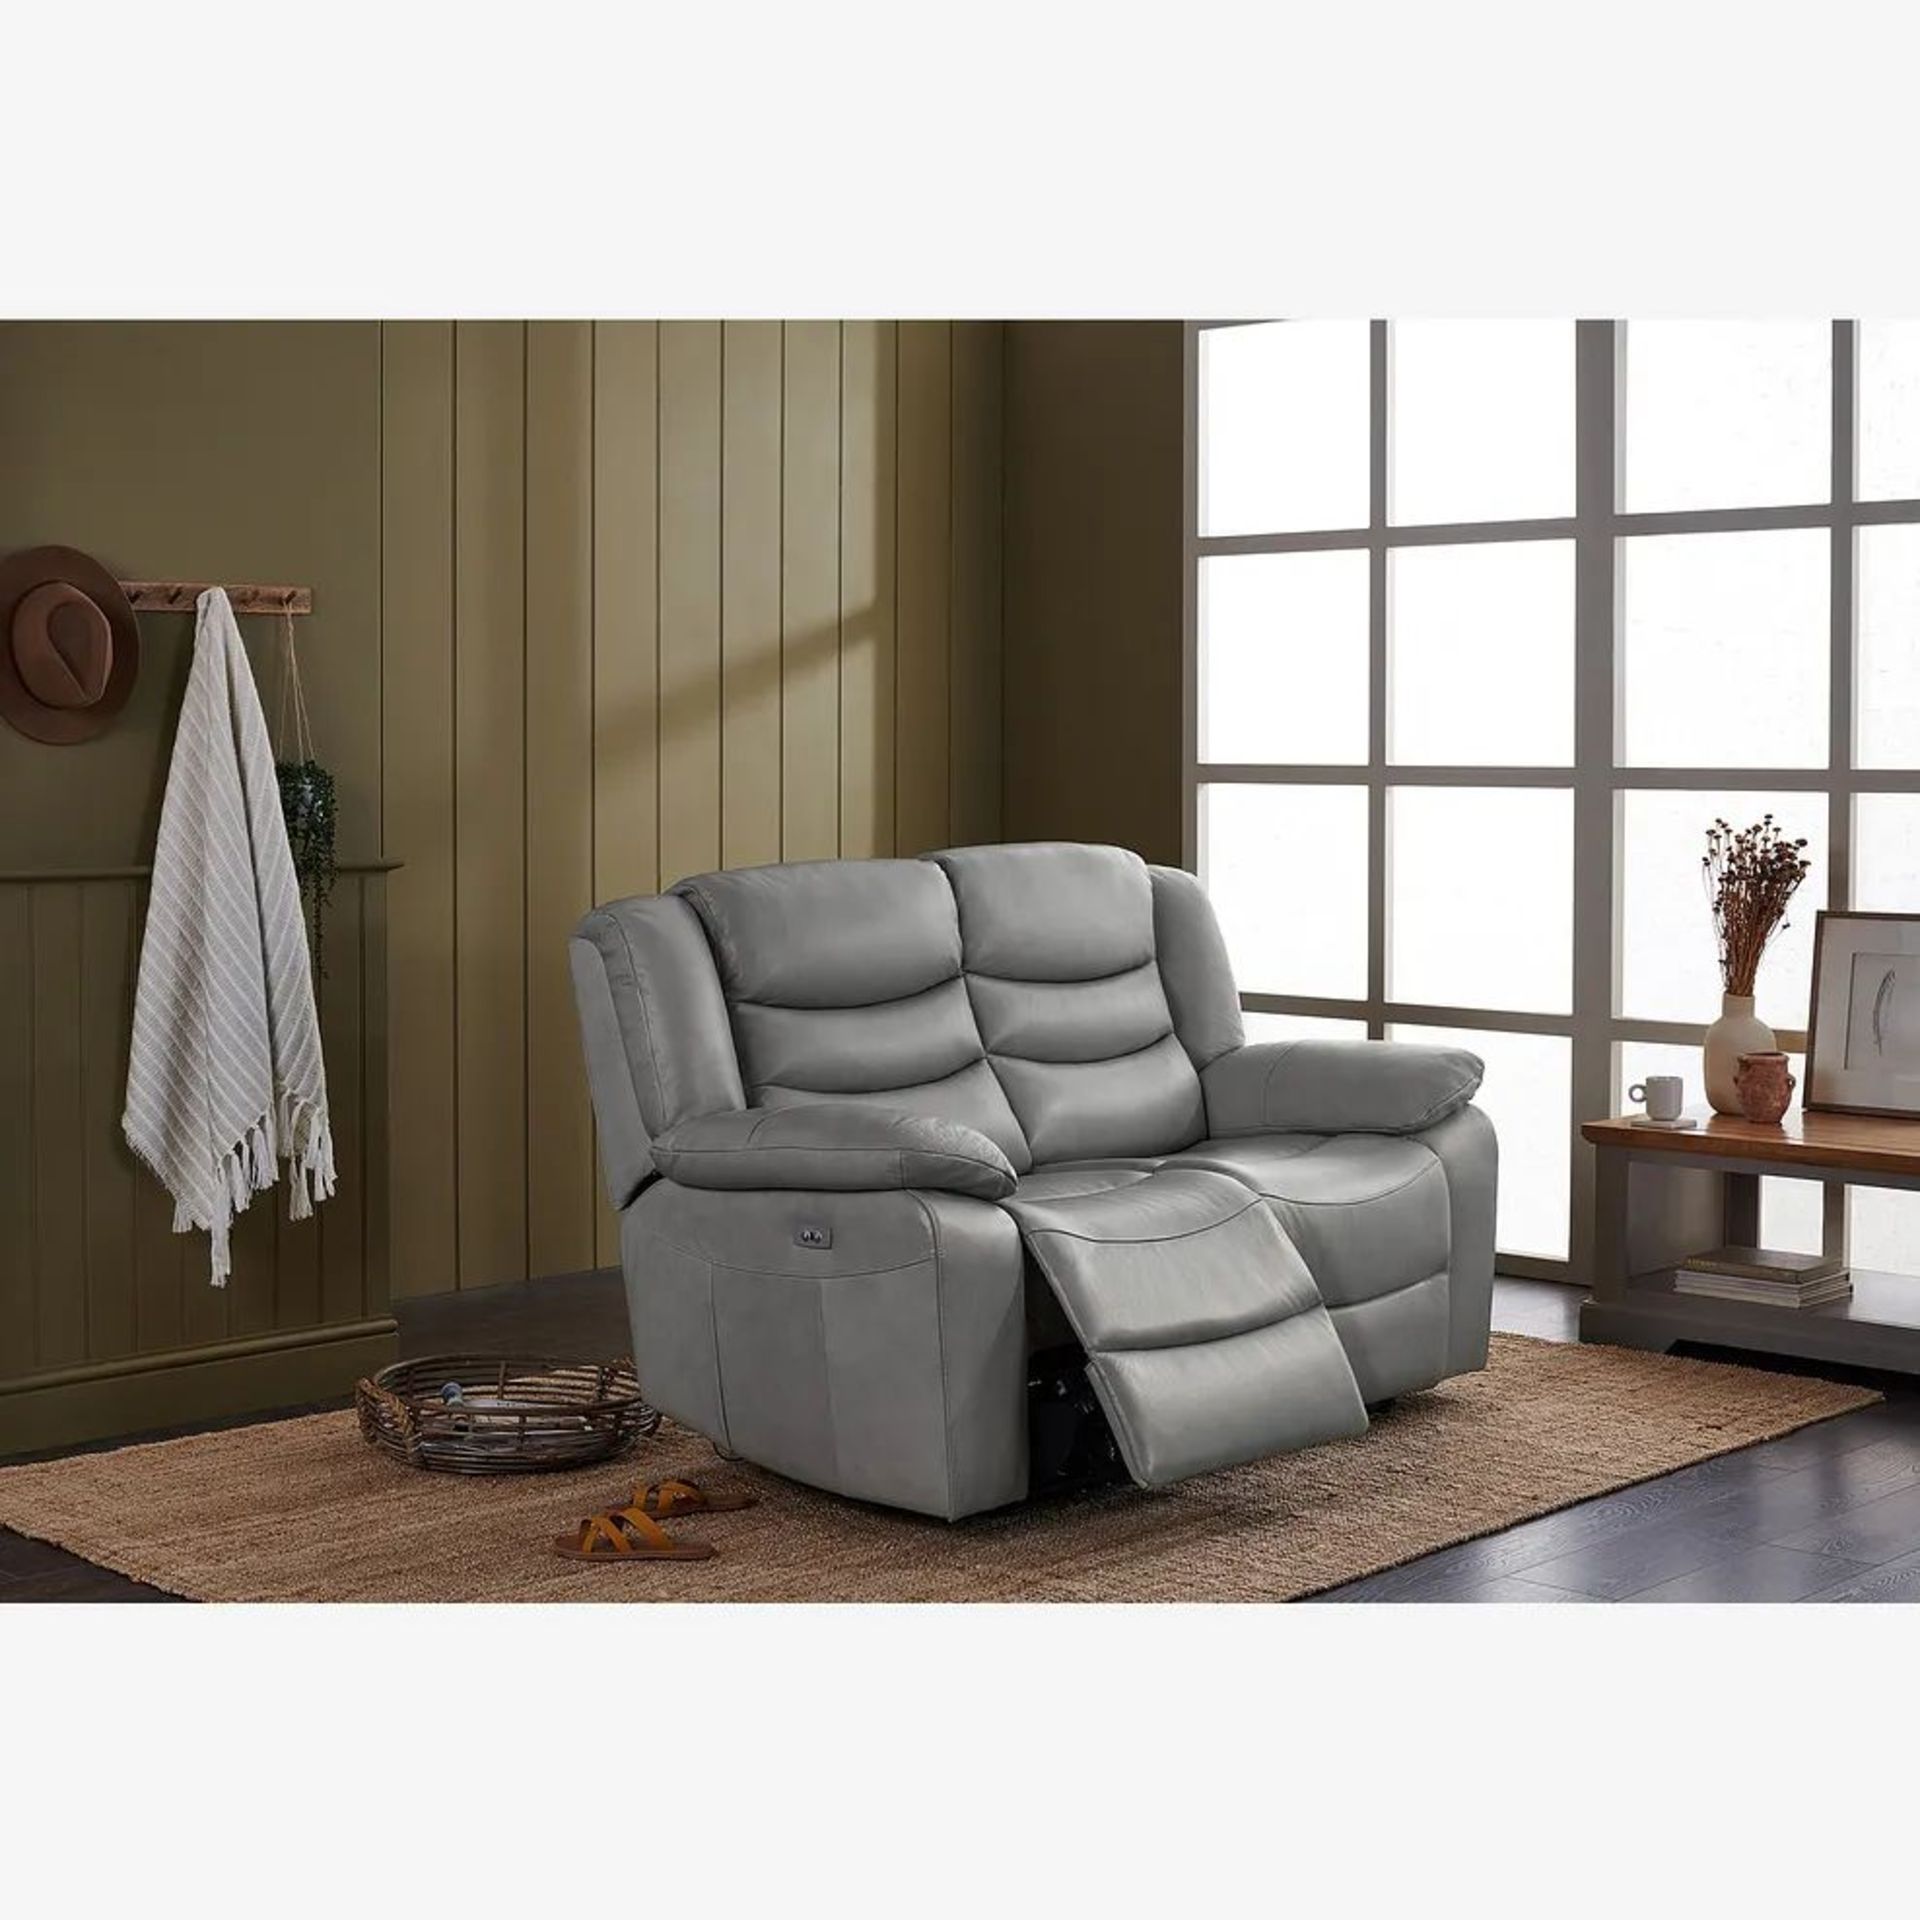 BRAND NEW MARLOW 2 Seater Electric Recliner Sofa - LIGHT GREY LEATHER. RRP £1599. Our Marlow leather - Image 12 of 12